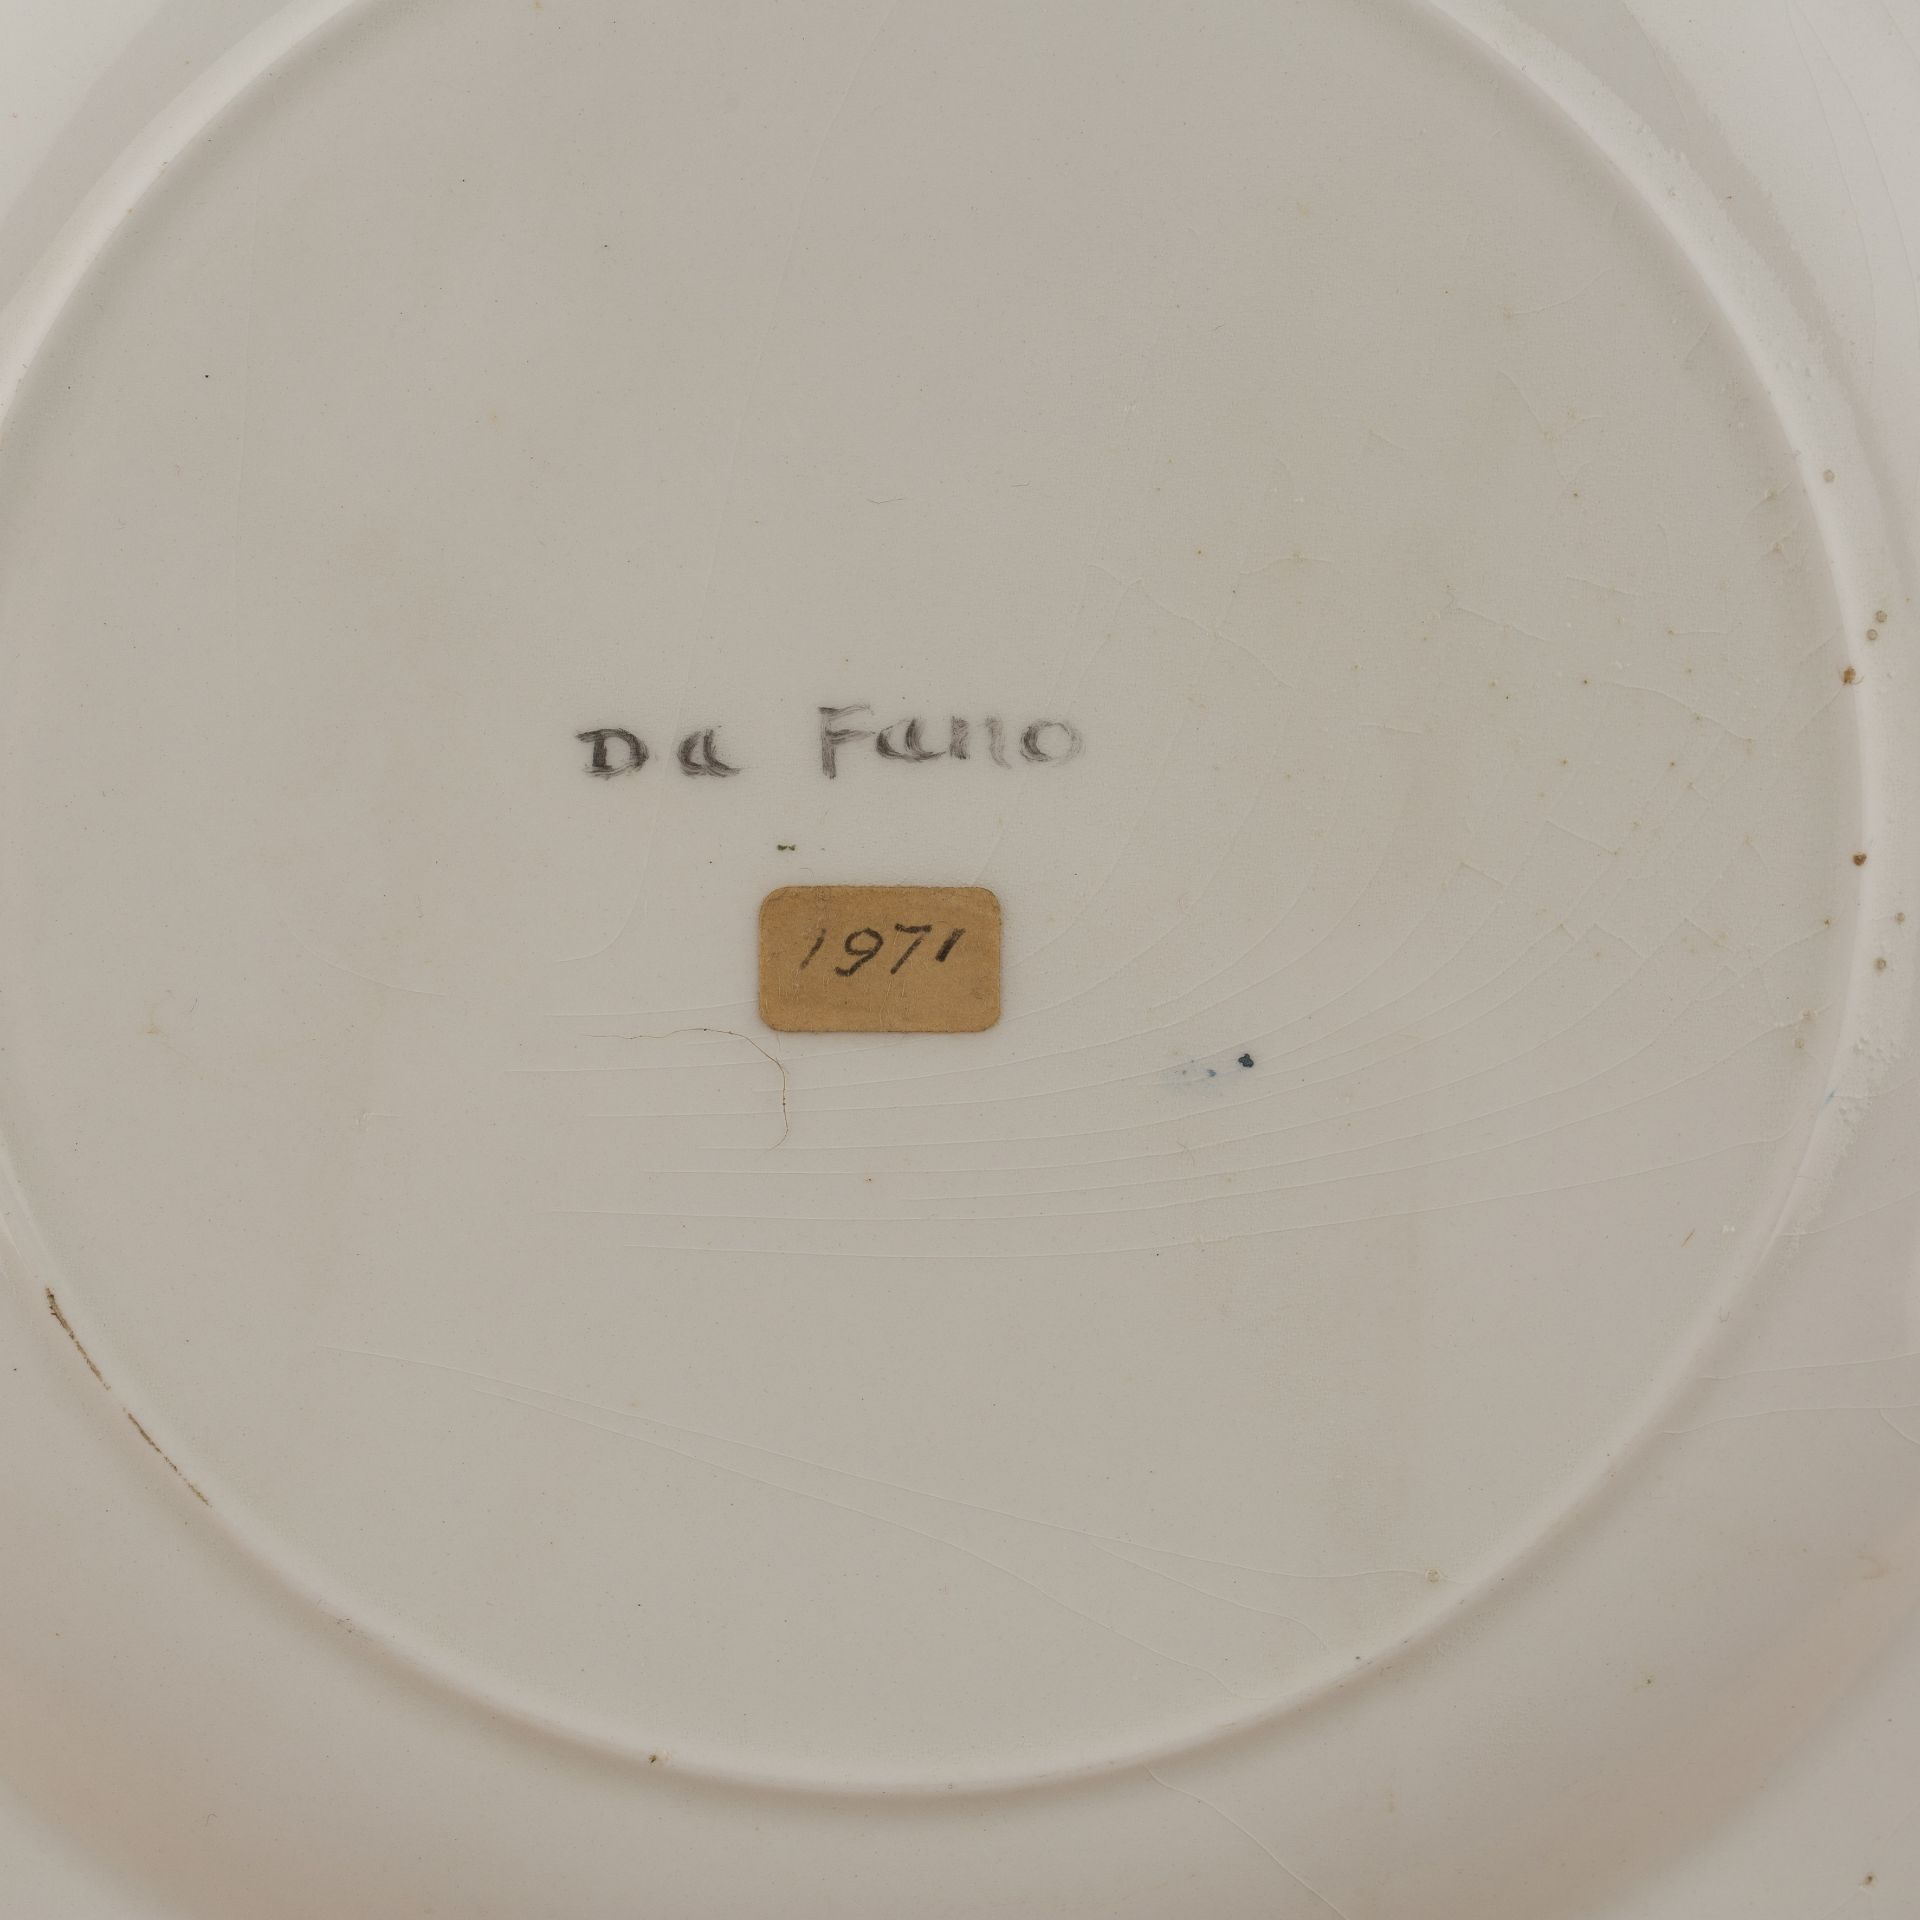 Judith da Fano (1919–2000) After L.S Lowry (1887-1976) 'At the fair', ceramic cabinet plate, label - Image 2 of 2